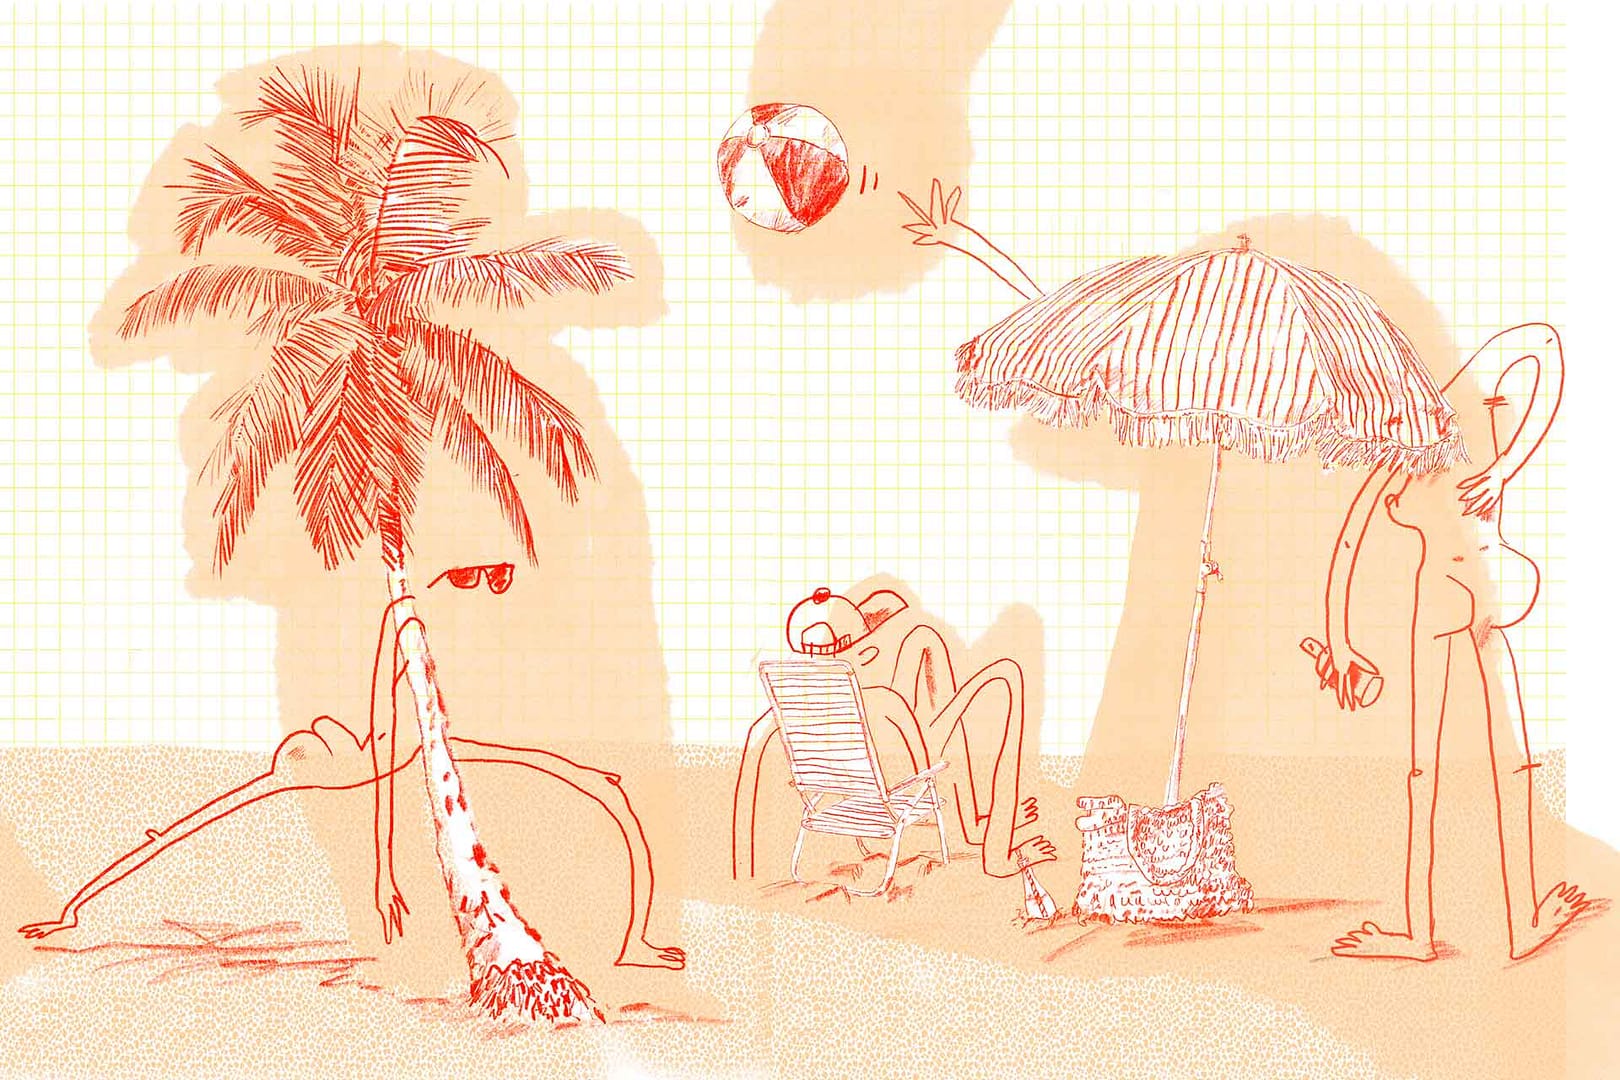 Beach Plz - a wallpaper by CS&Co Artist Koos of hand drawn figures on the beach, there is a palm tree, beach chair and umbrella by Cara Saven Wall Design